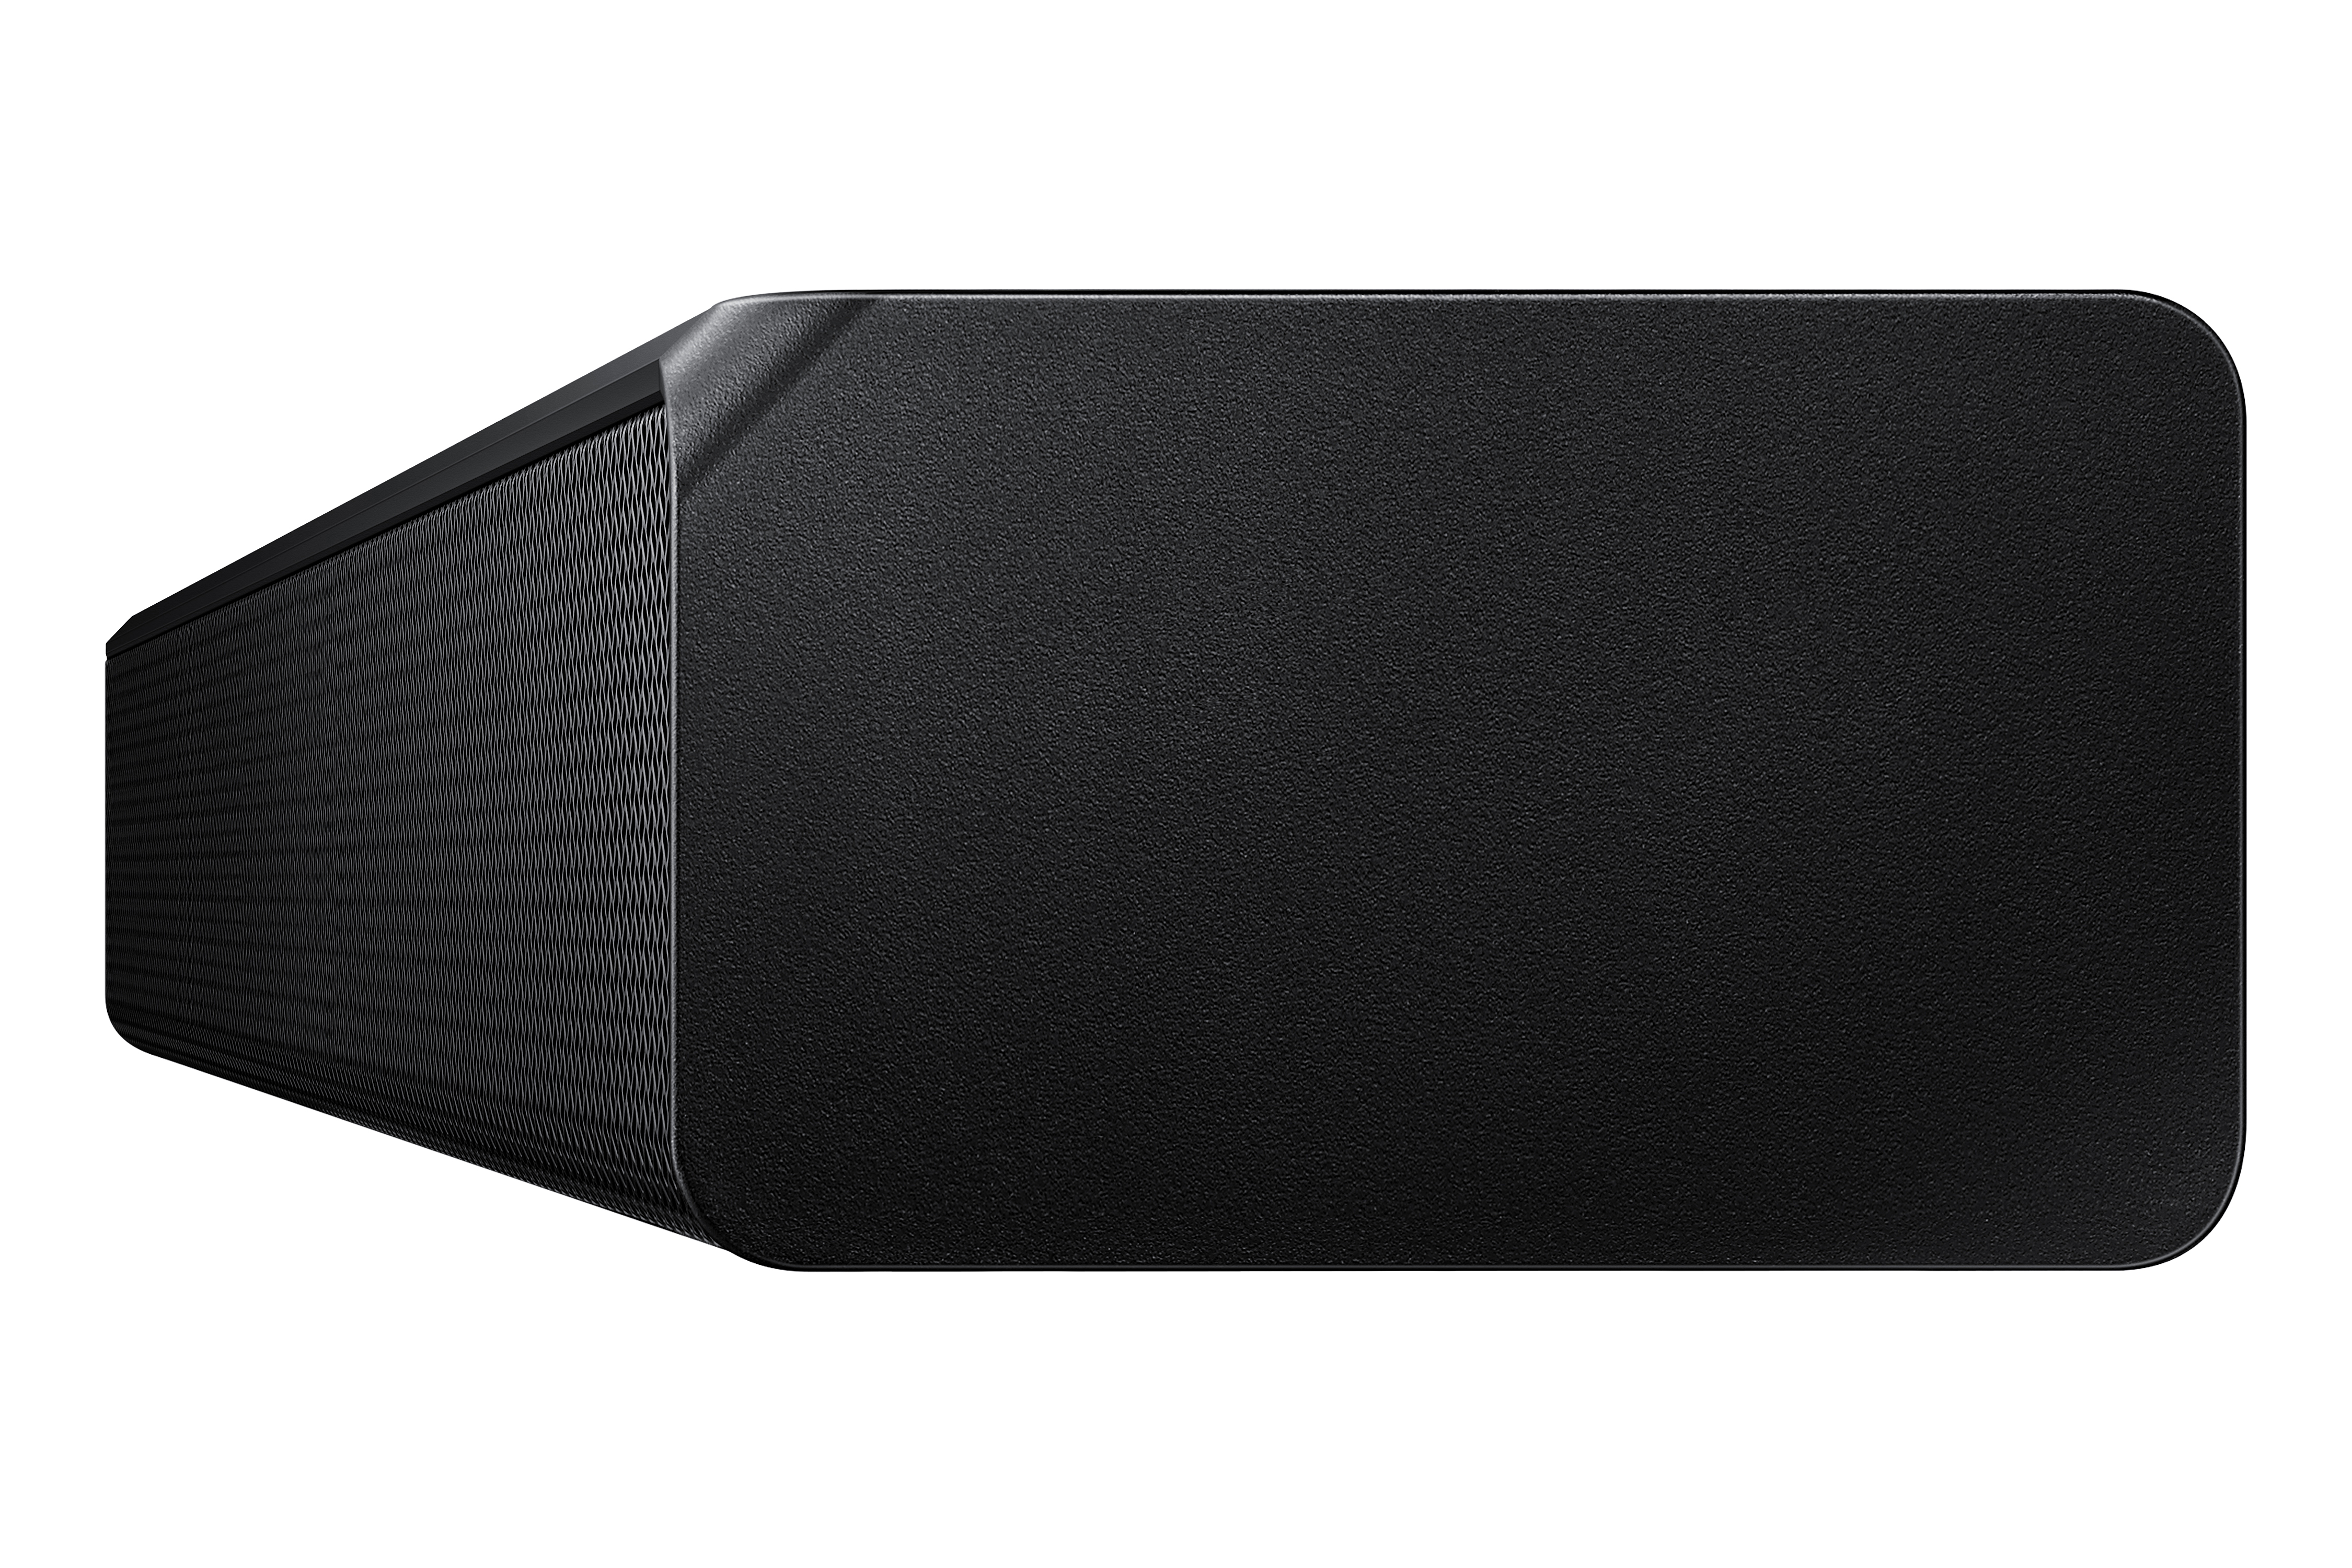 SAMSUNG HW-A50M 2.1 Channel Soundbar with Wireless Subwoofer and Dolby Audio - image 5 of 13